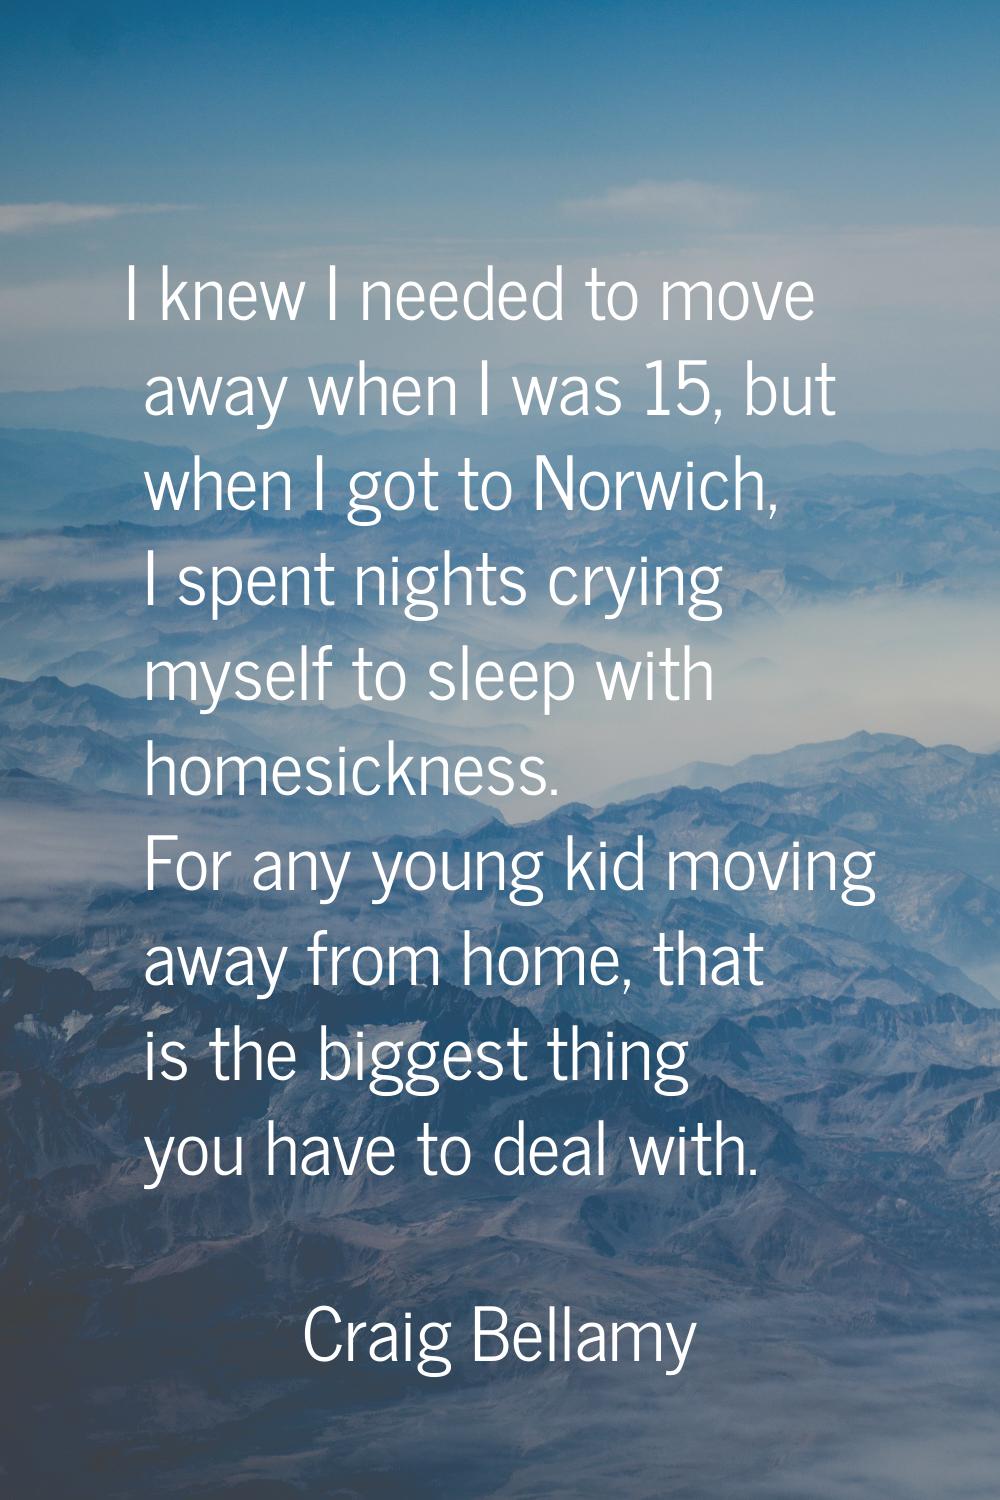 I knew I needed to move away when I was 15, but when I got to Norwich, I spent nights crying myself